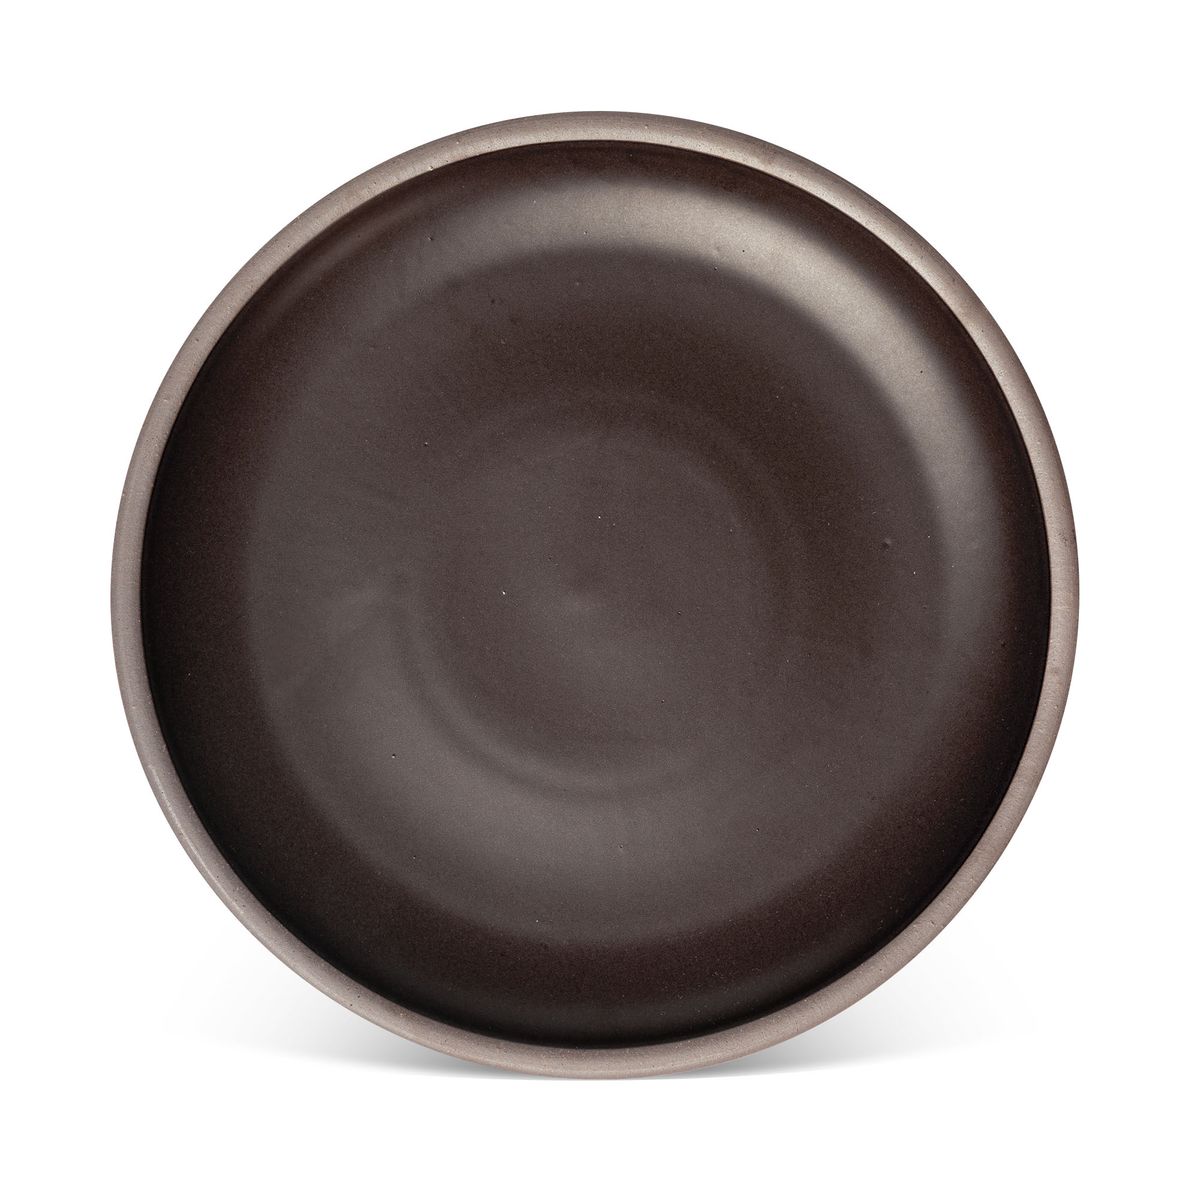 A large ceramic platter in a dark cool brown color featuring iron speckles and an unglazed rim